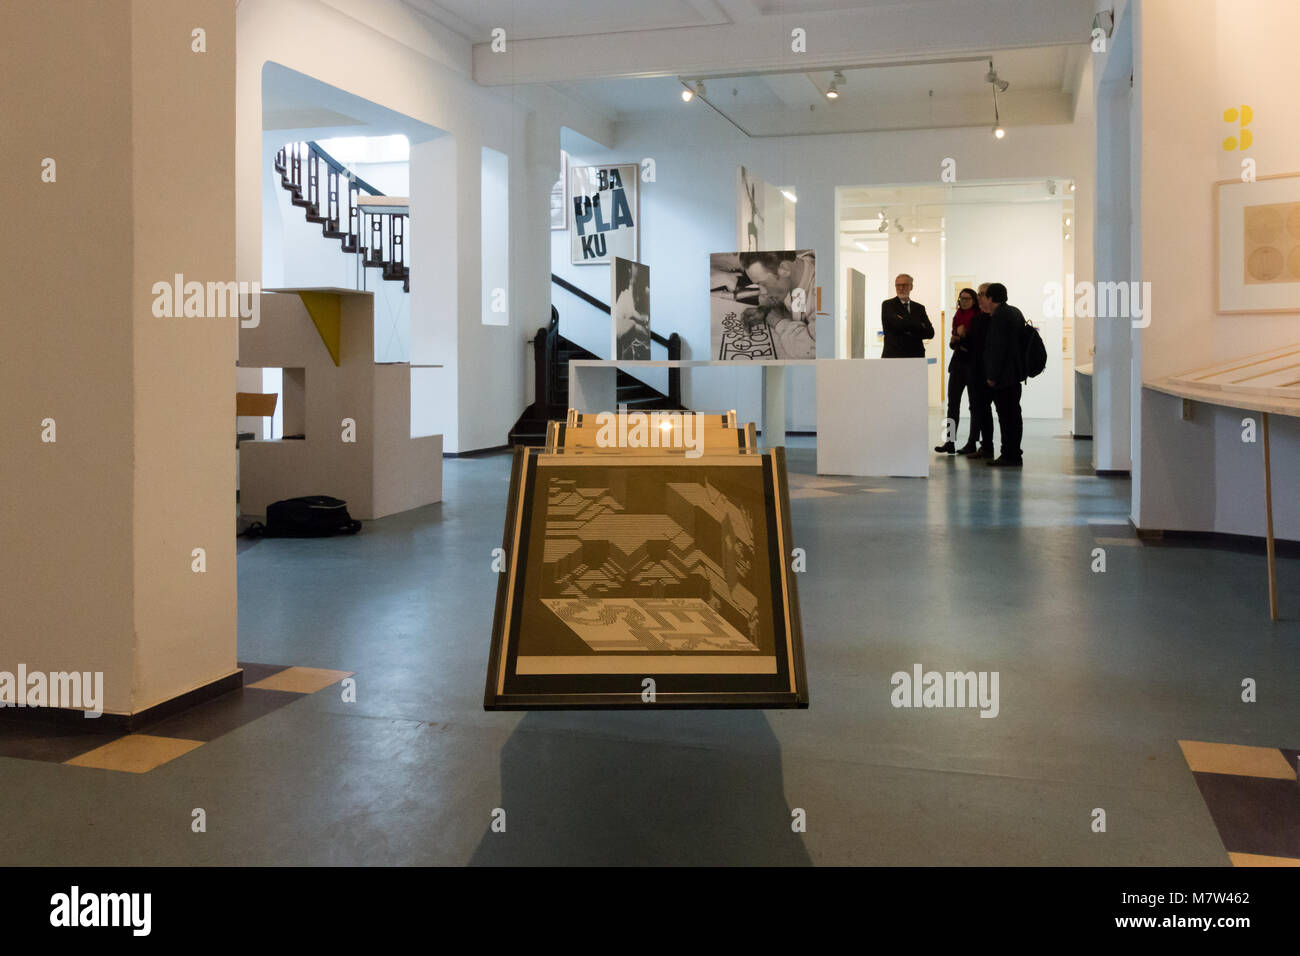 Magdeburg, Germany - March 13,2018: View of the art exhibition 'Willi Eidenbenz - Zurich, Magdeburg, Basel' at the Design Forum in Magdeburg, Germany. Credit: Mattis Kaminer/Alamy Live News Stock Photo